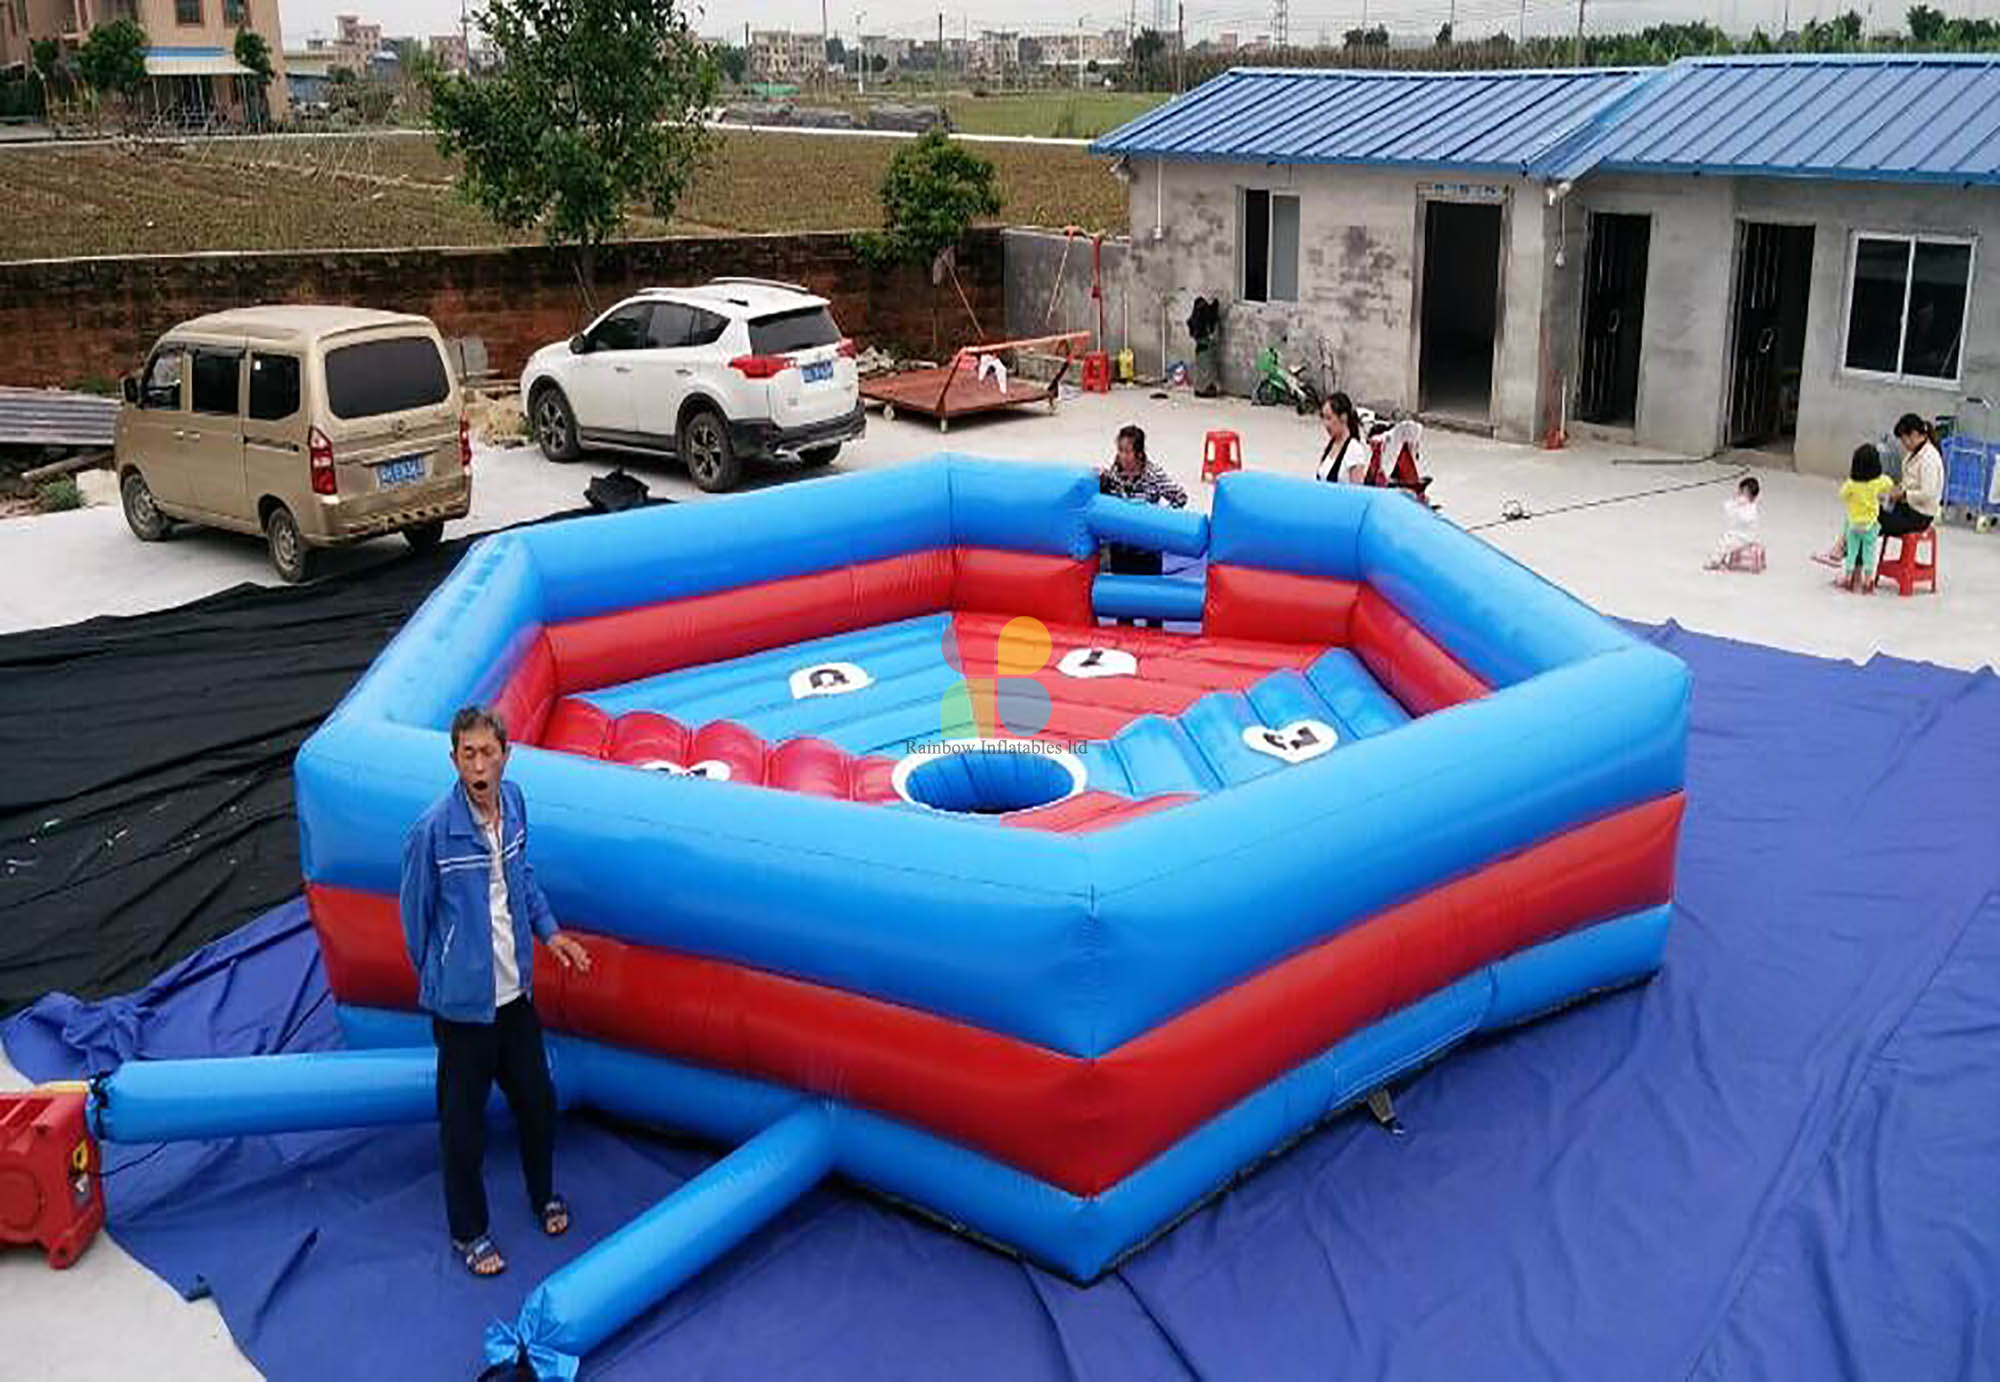 RB91015 （dia 7m）Inflatable Wipeout Game Matrress /inflatable mechanical bull